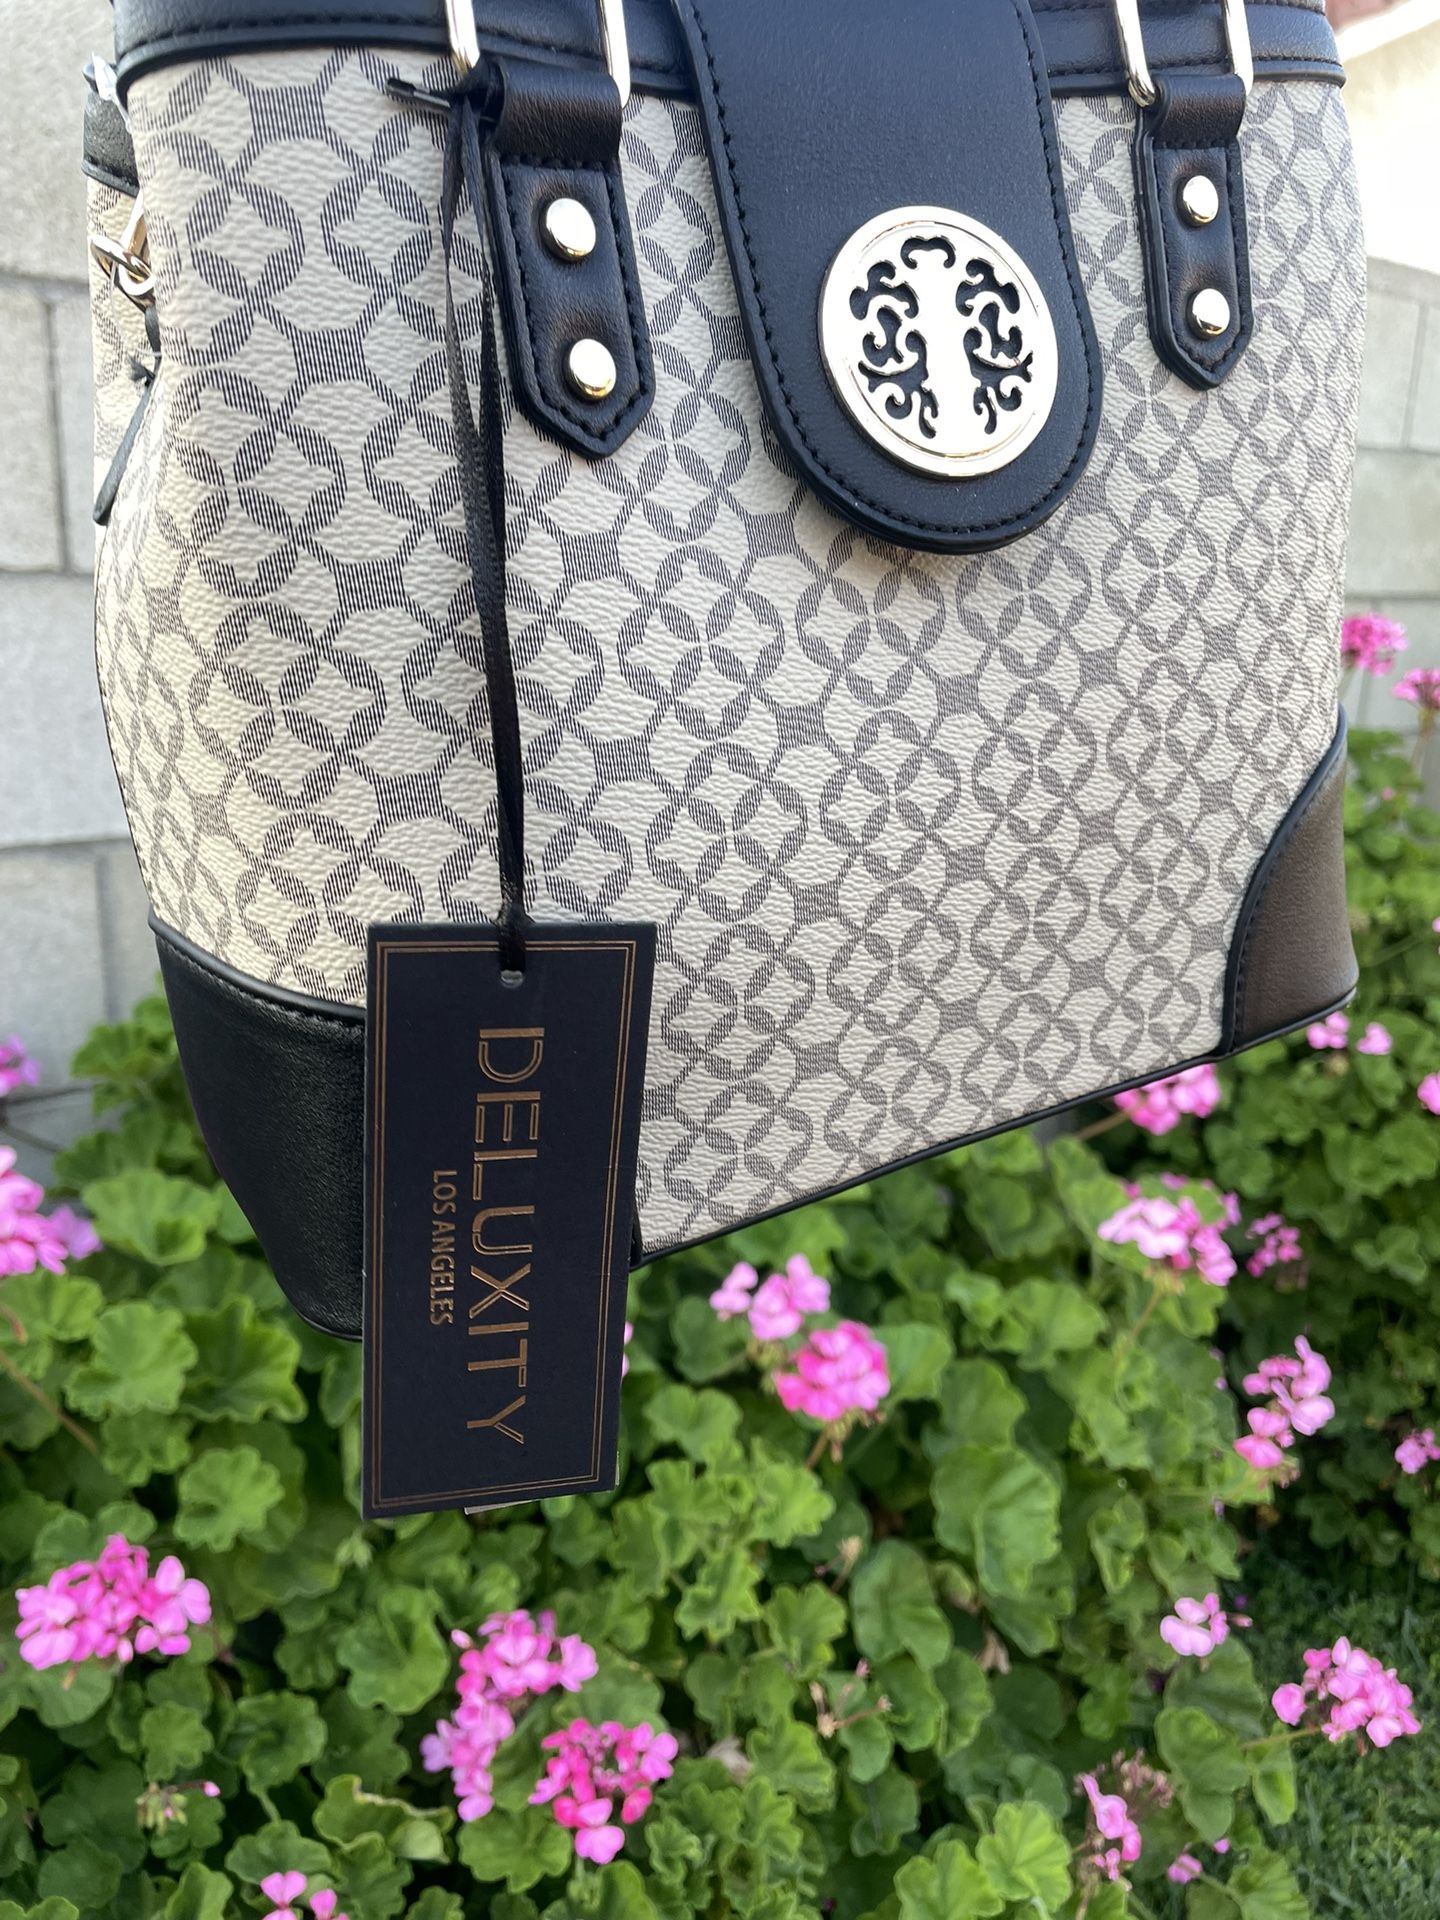 Deluxity Bag New With Tags for Sale in Los Angeles, CA - OfferUp